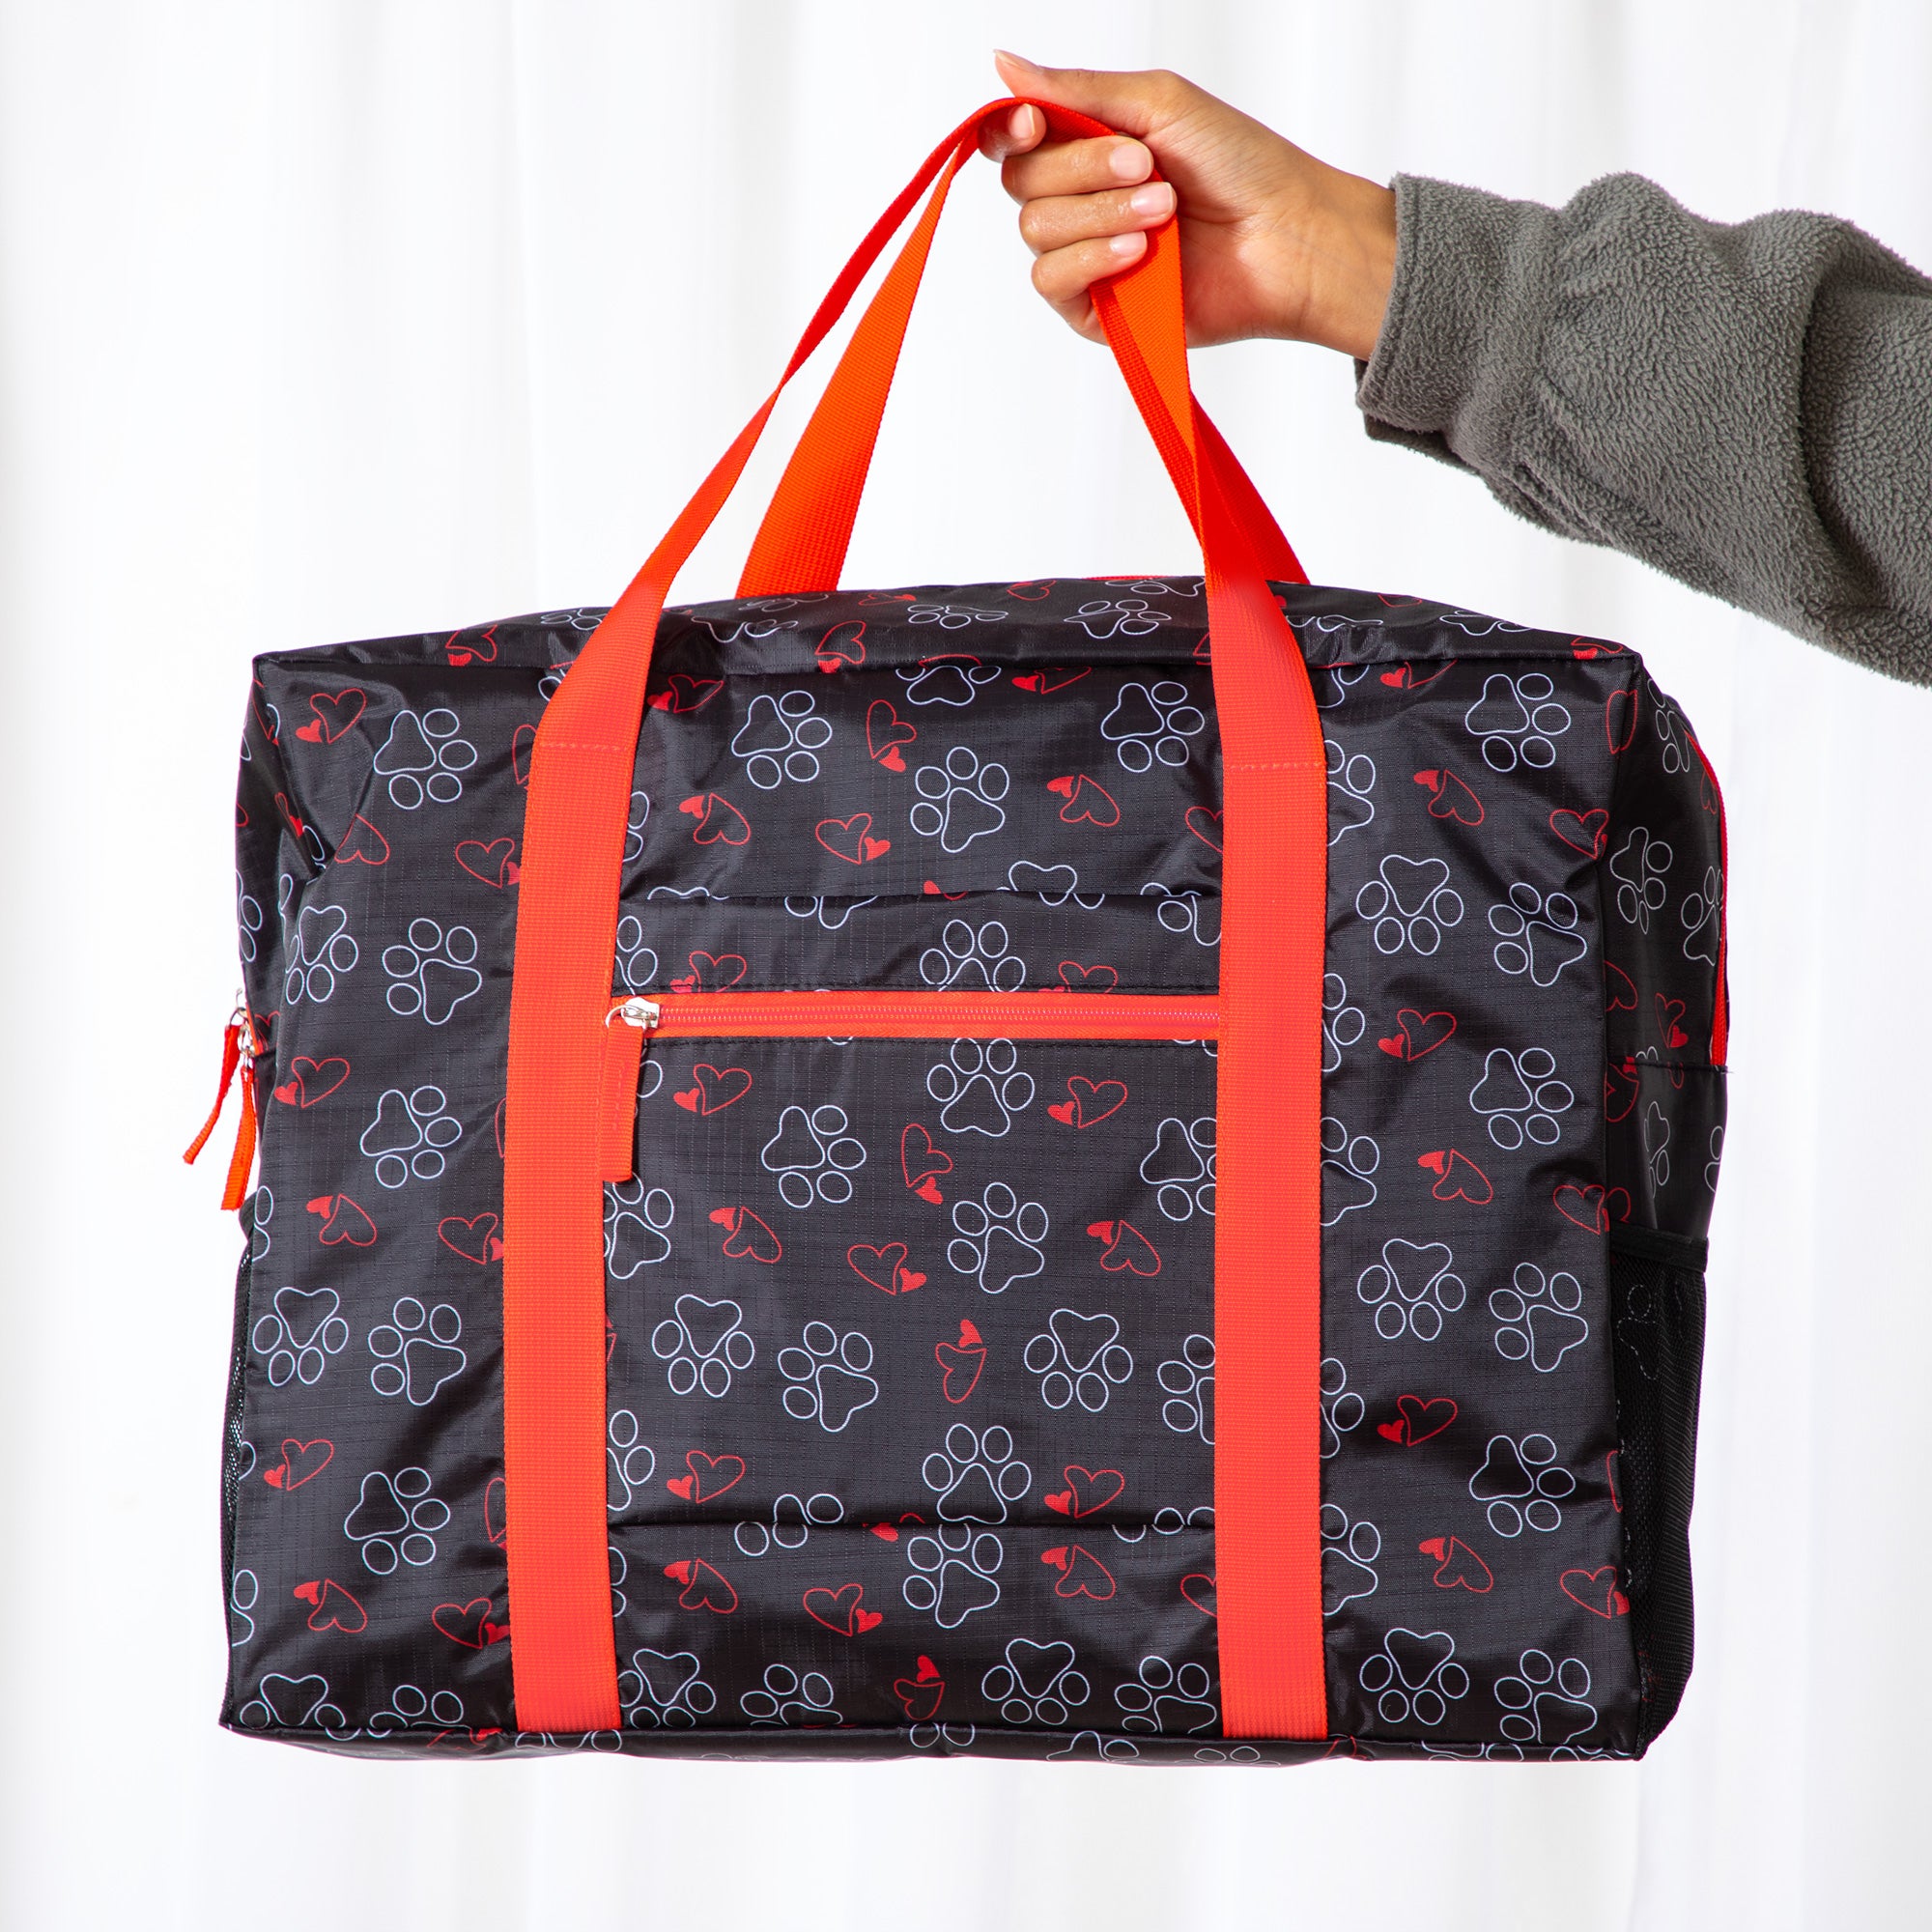 Paw Print Travel Bag - Outlined Paws & Hearts